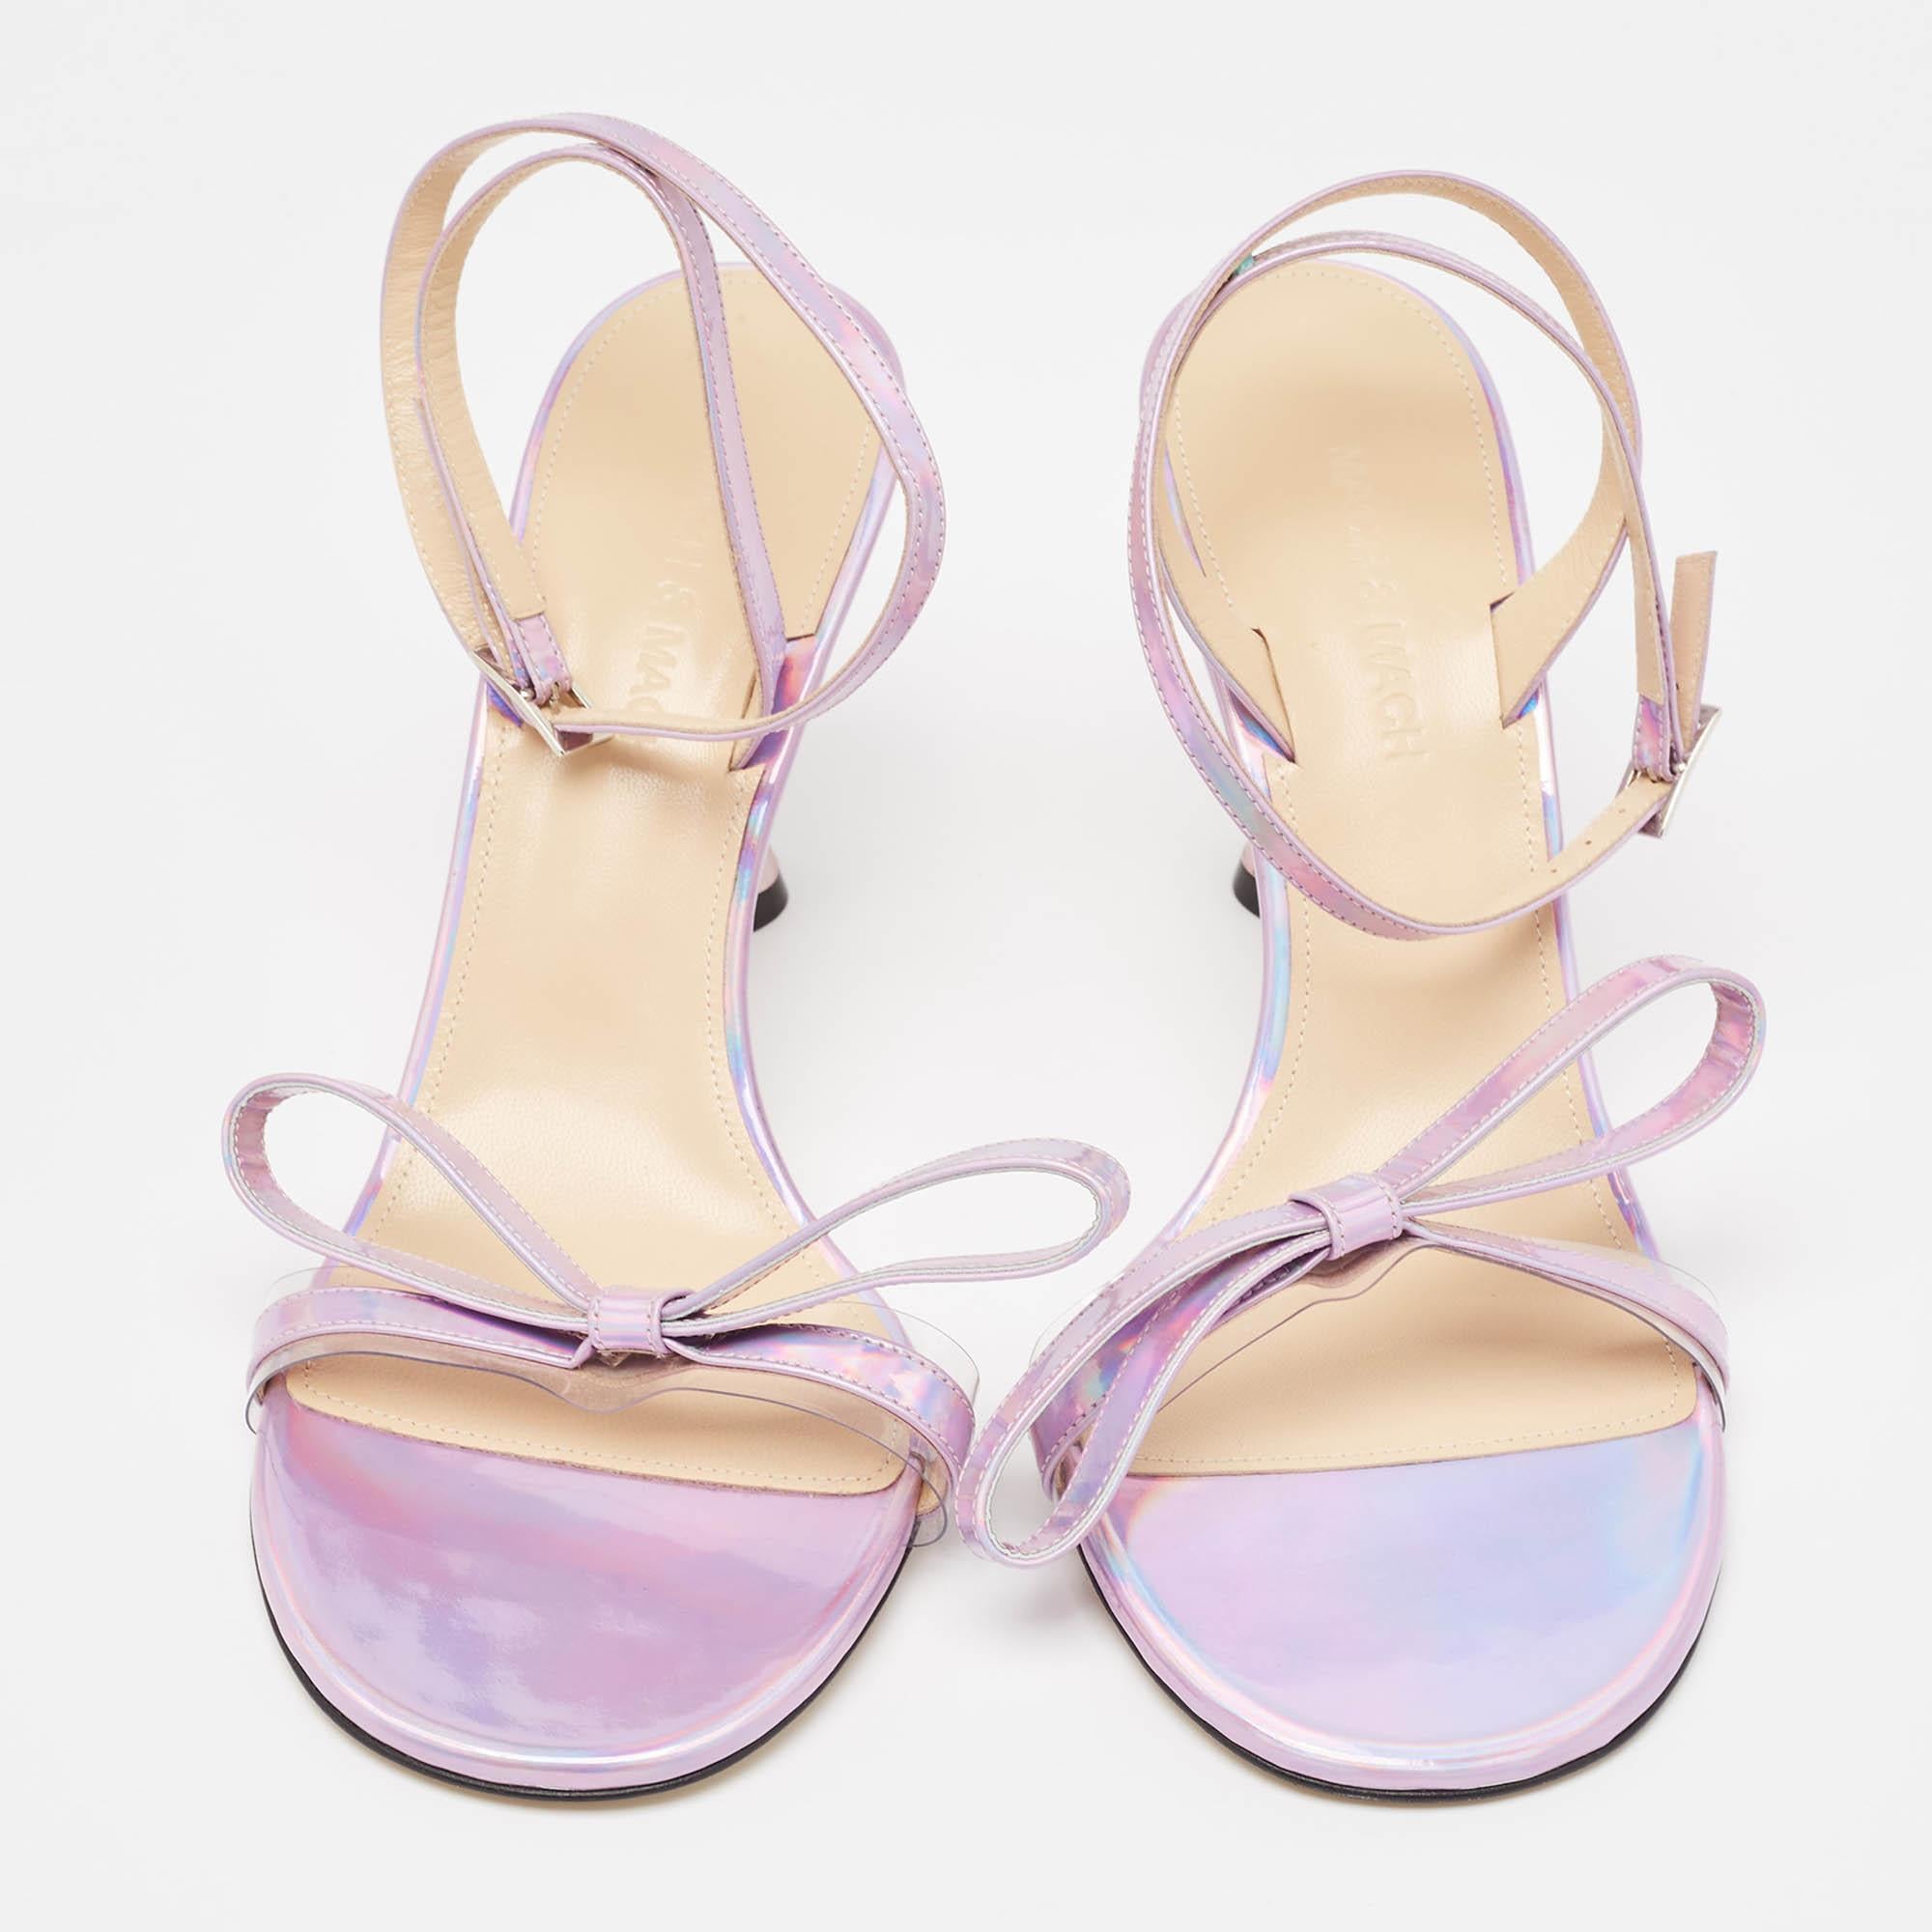 Slip into the epitome of playful luxury with Mach & Mach's sandals. Crafted with meticulous attention to detail, these sandals feature a charming French bow accent, they are crafted using iridescent leather for a captivating, statement-making